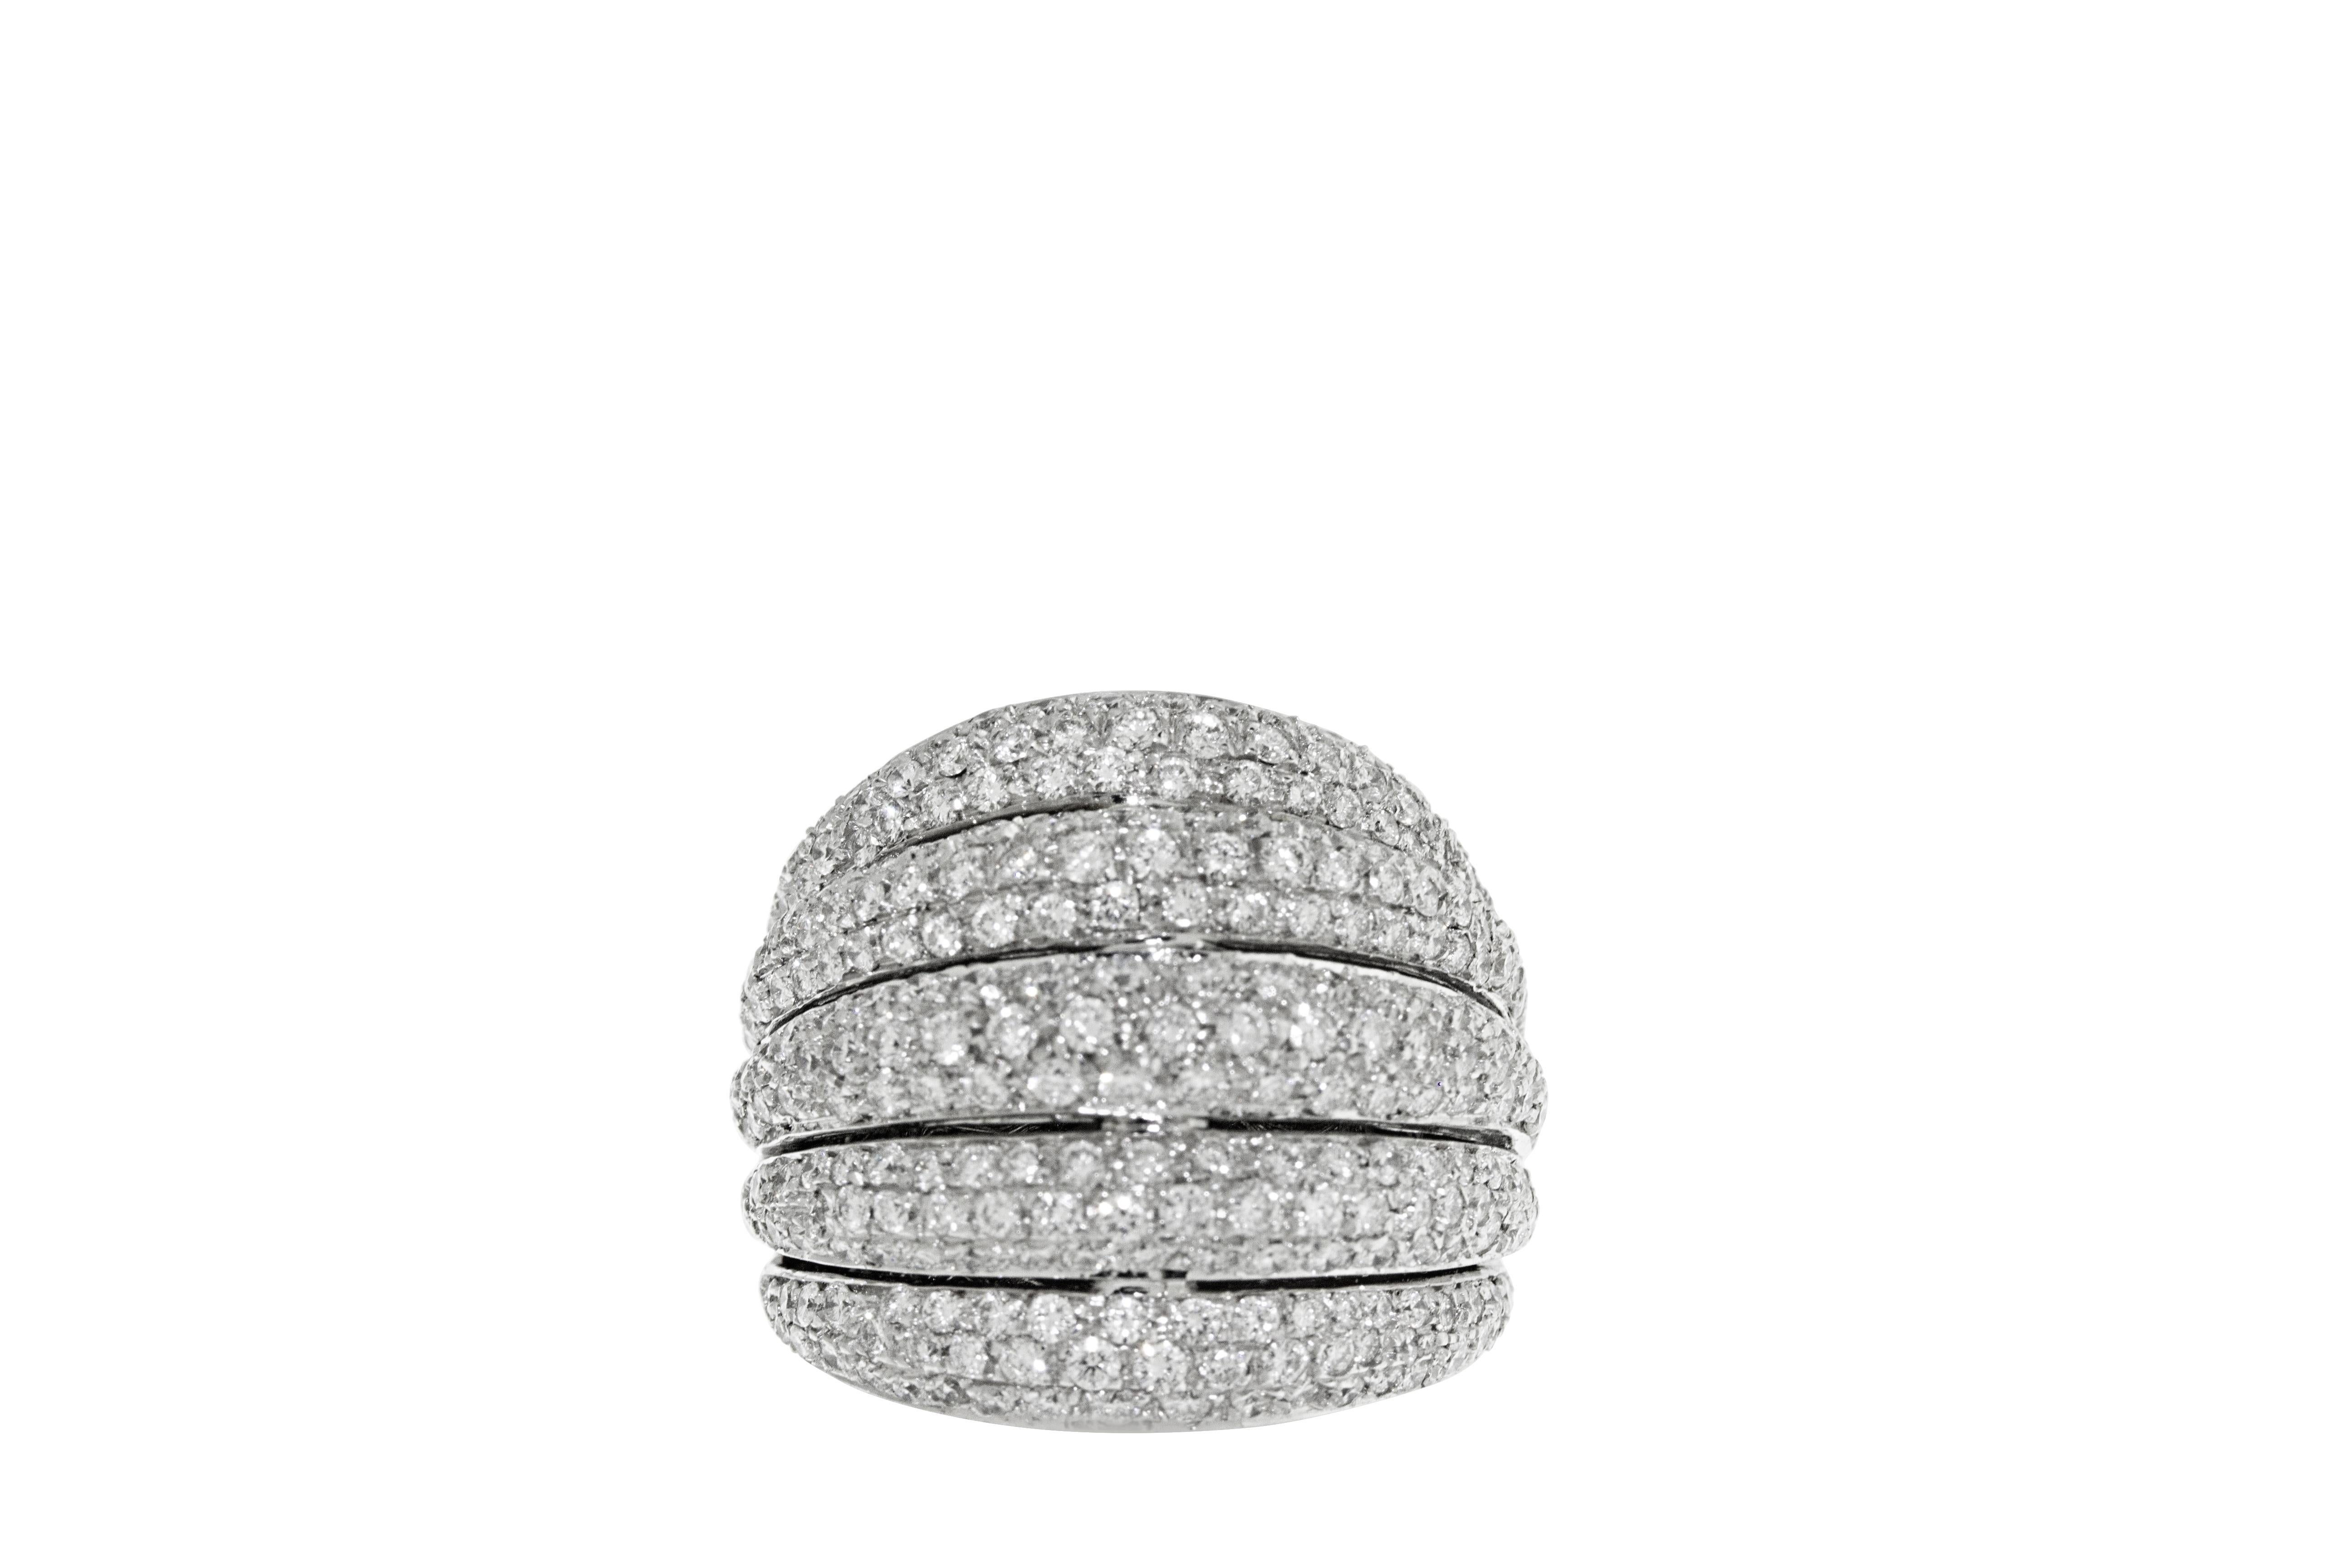 18K white gold  fashion cocktail ring featuring 3.14 carats of G VS pave diamonds. 21 grams of 18 K white gold. Approximately 1 inch wide. Size 7 3/4. Made in Italy.

Can be sized down upon request. 

Viewings available in our NYC showroom by